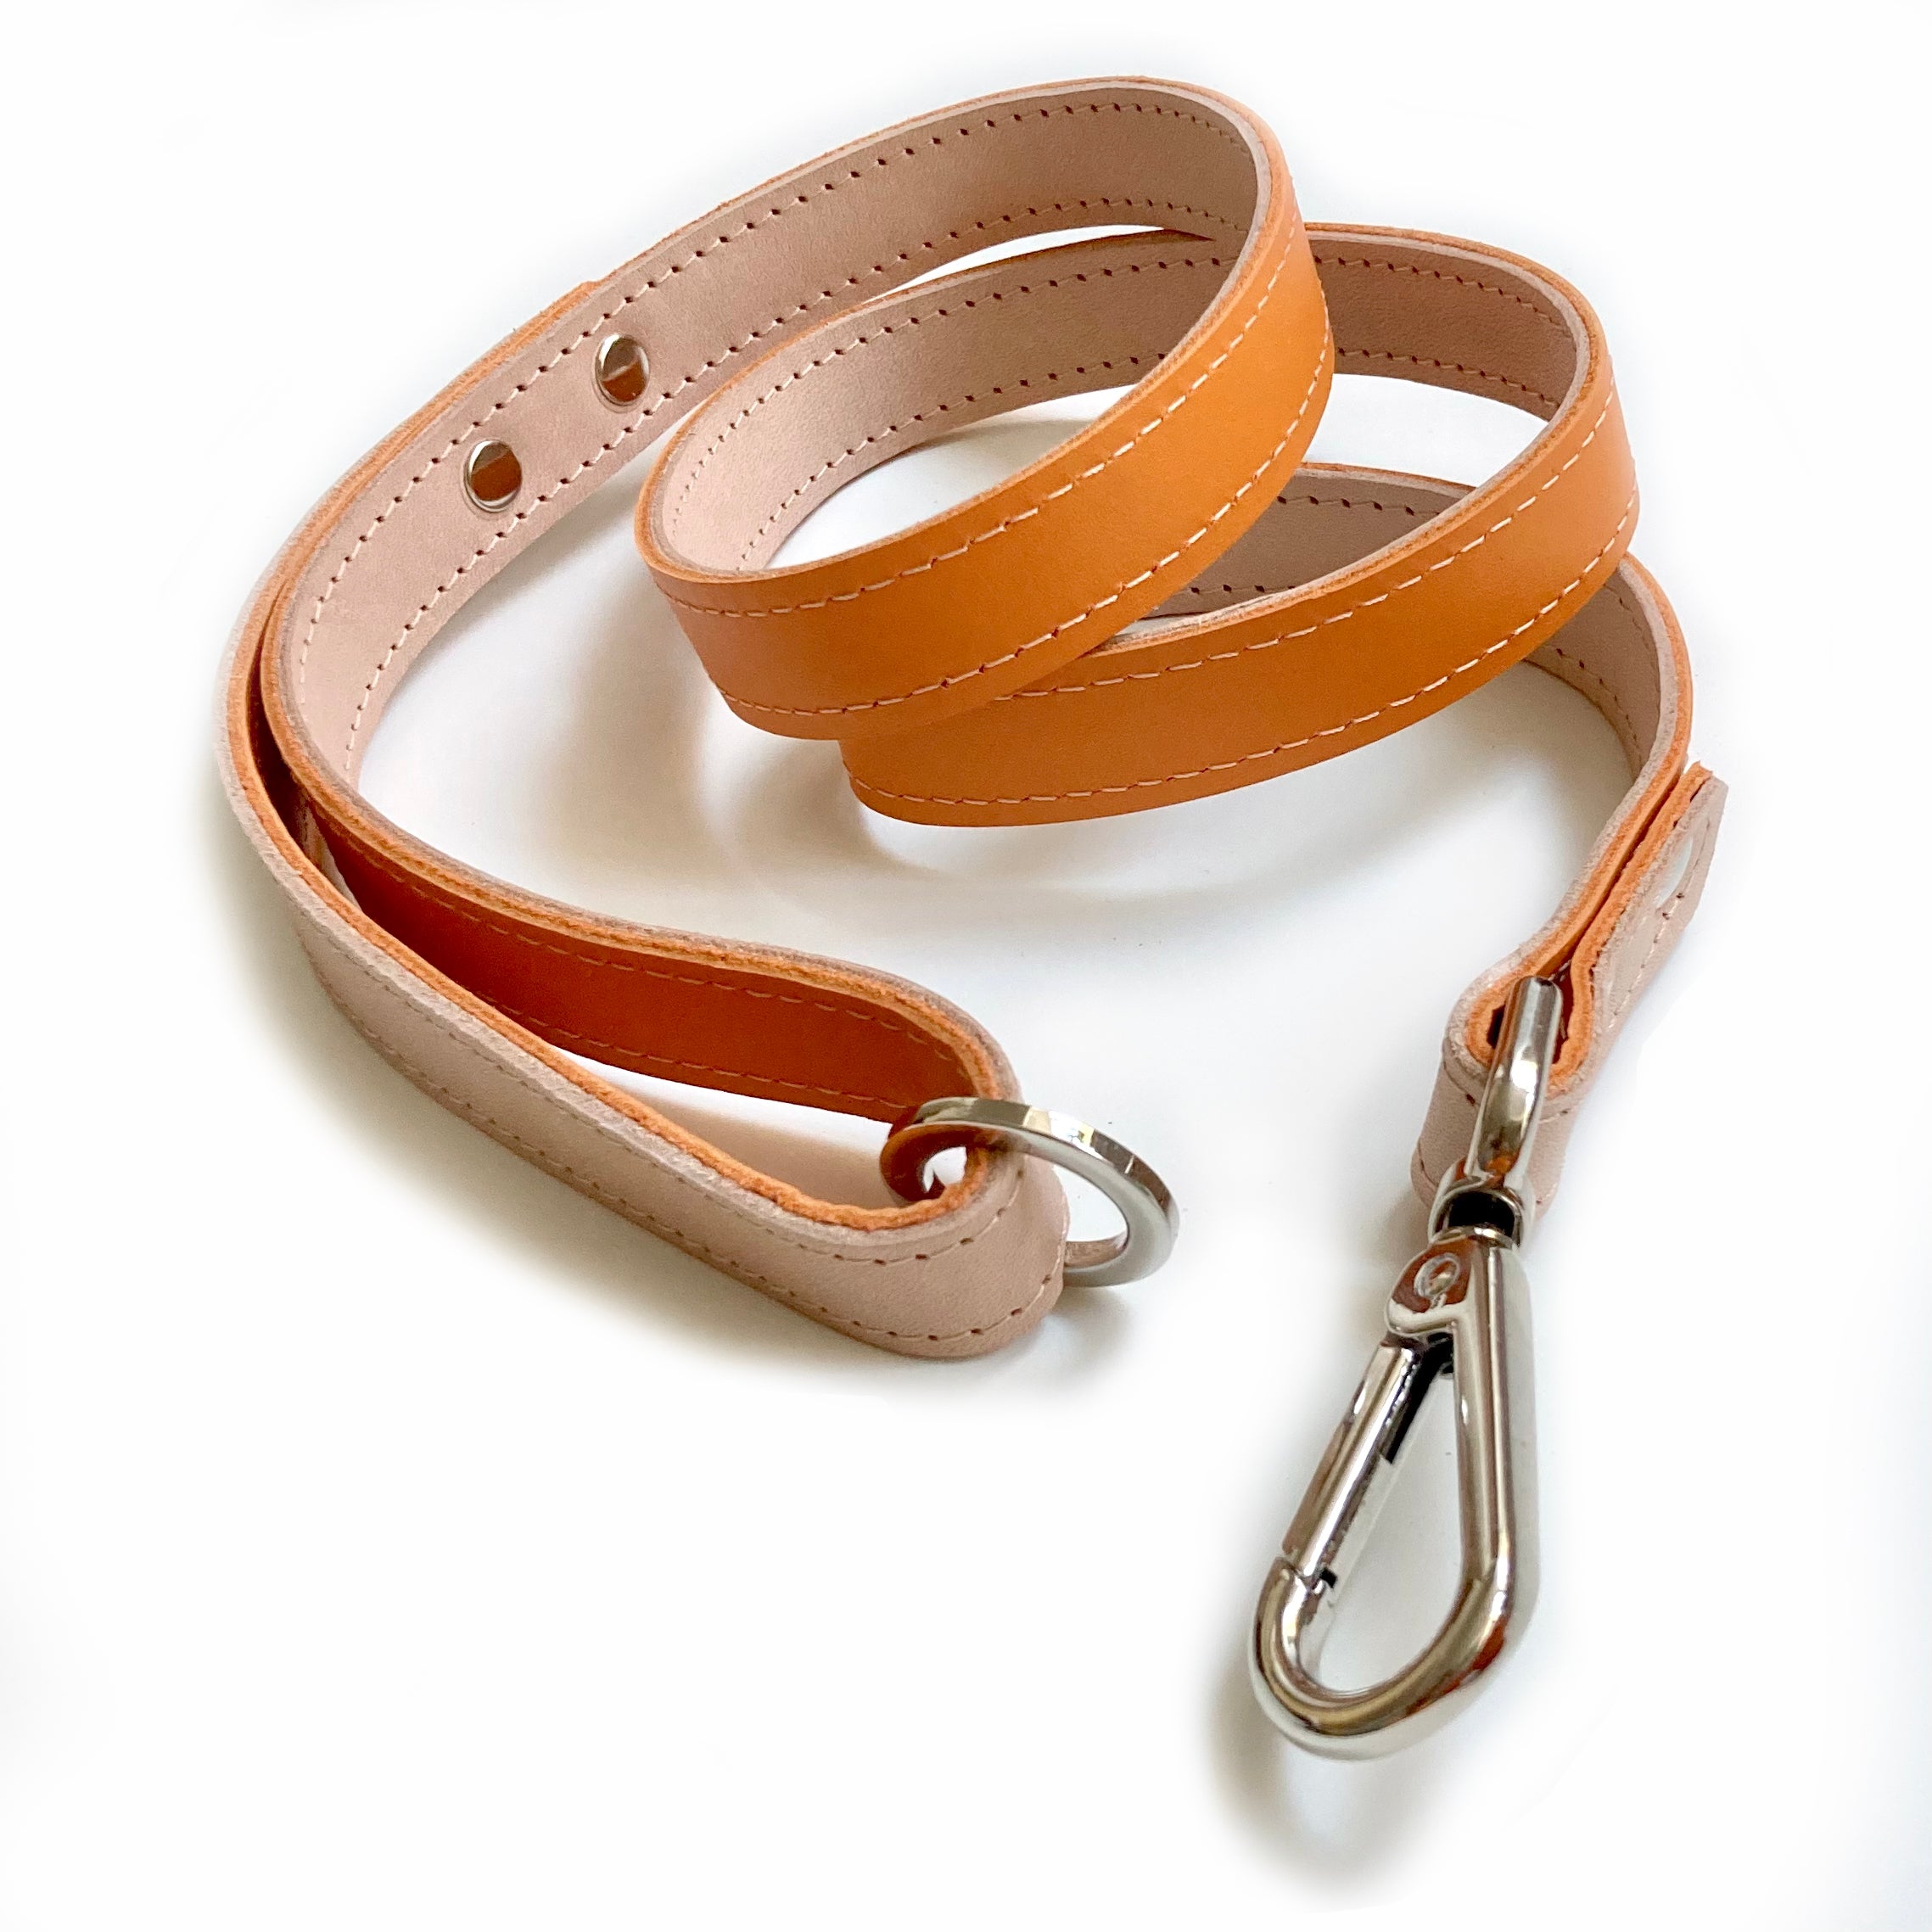 Simple Leash- for taller dogs and those who prefer to keep their dogs closer